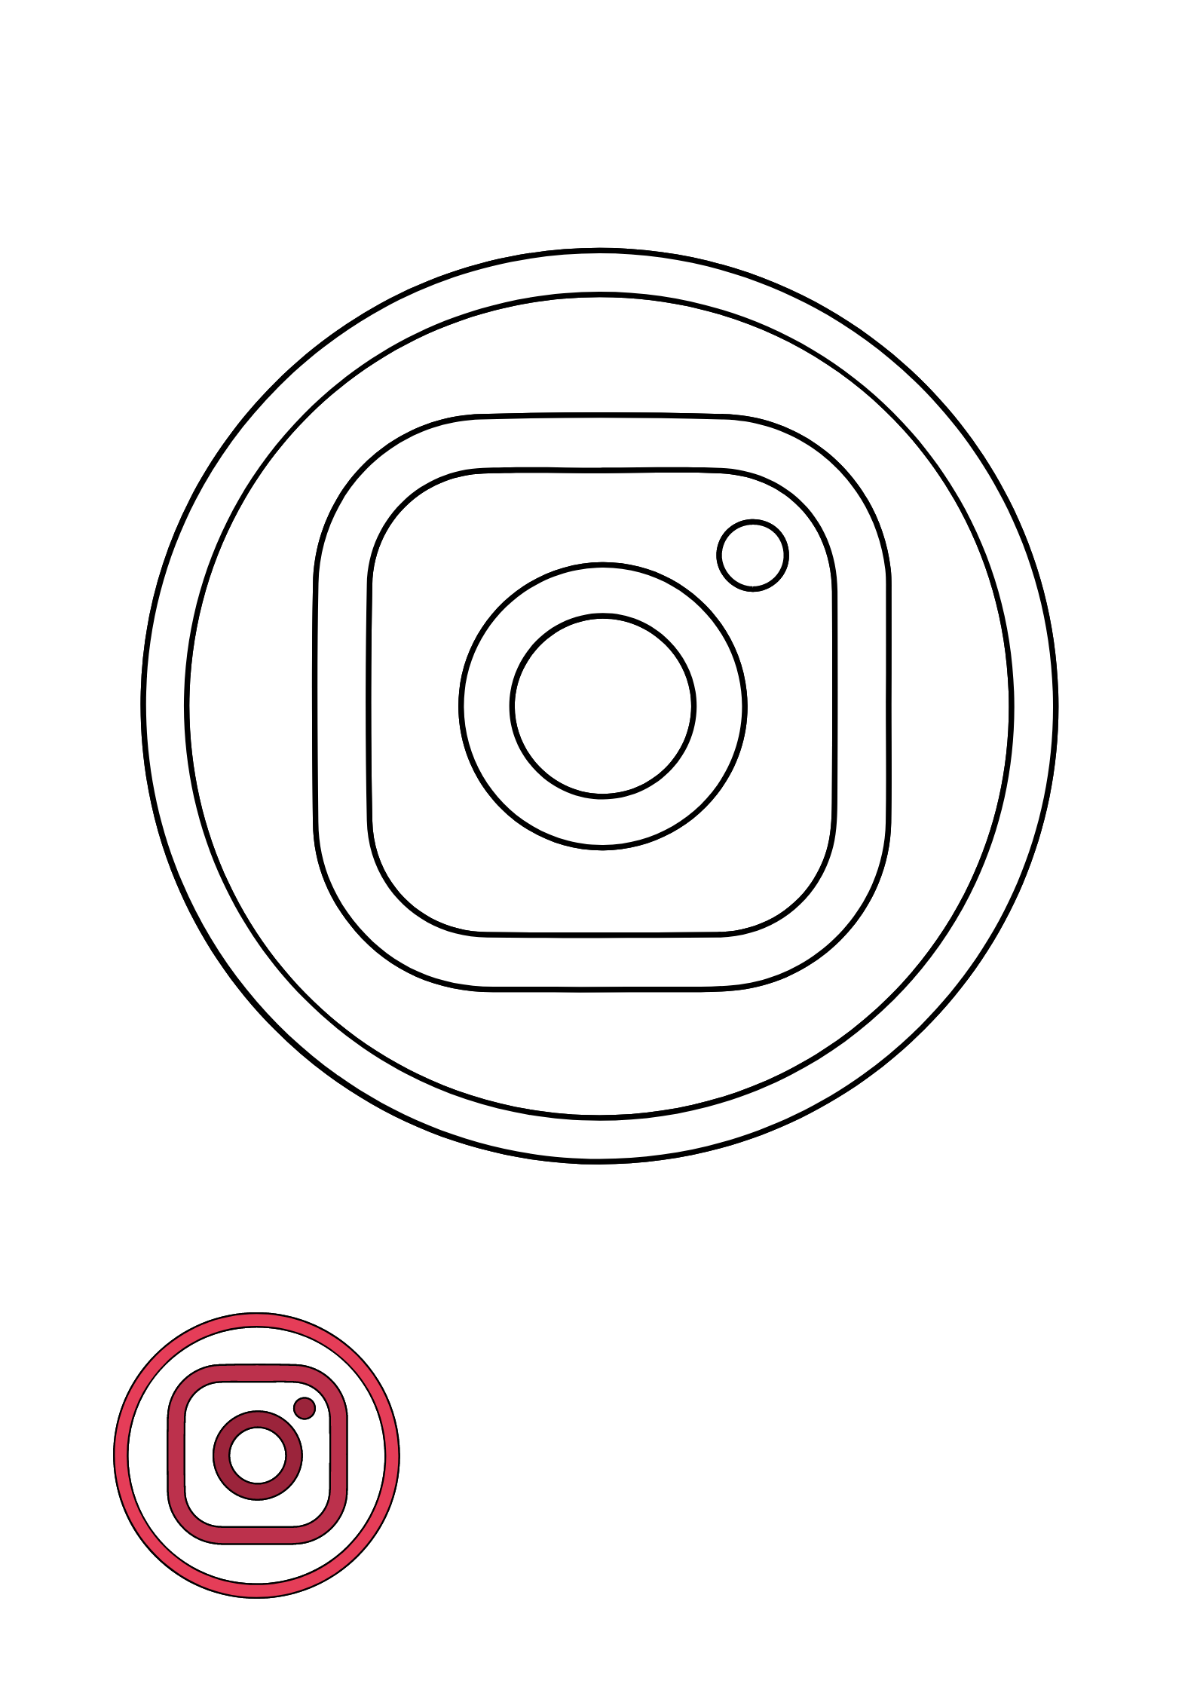 Instagram Circle Logo Coloring Page Template